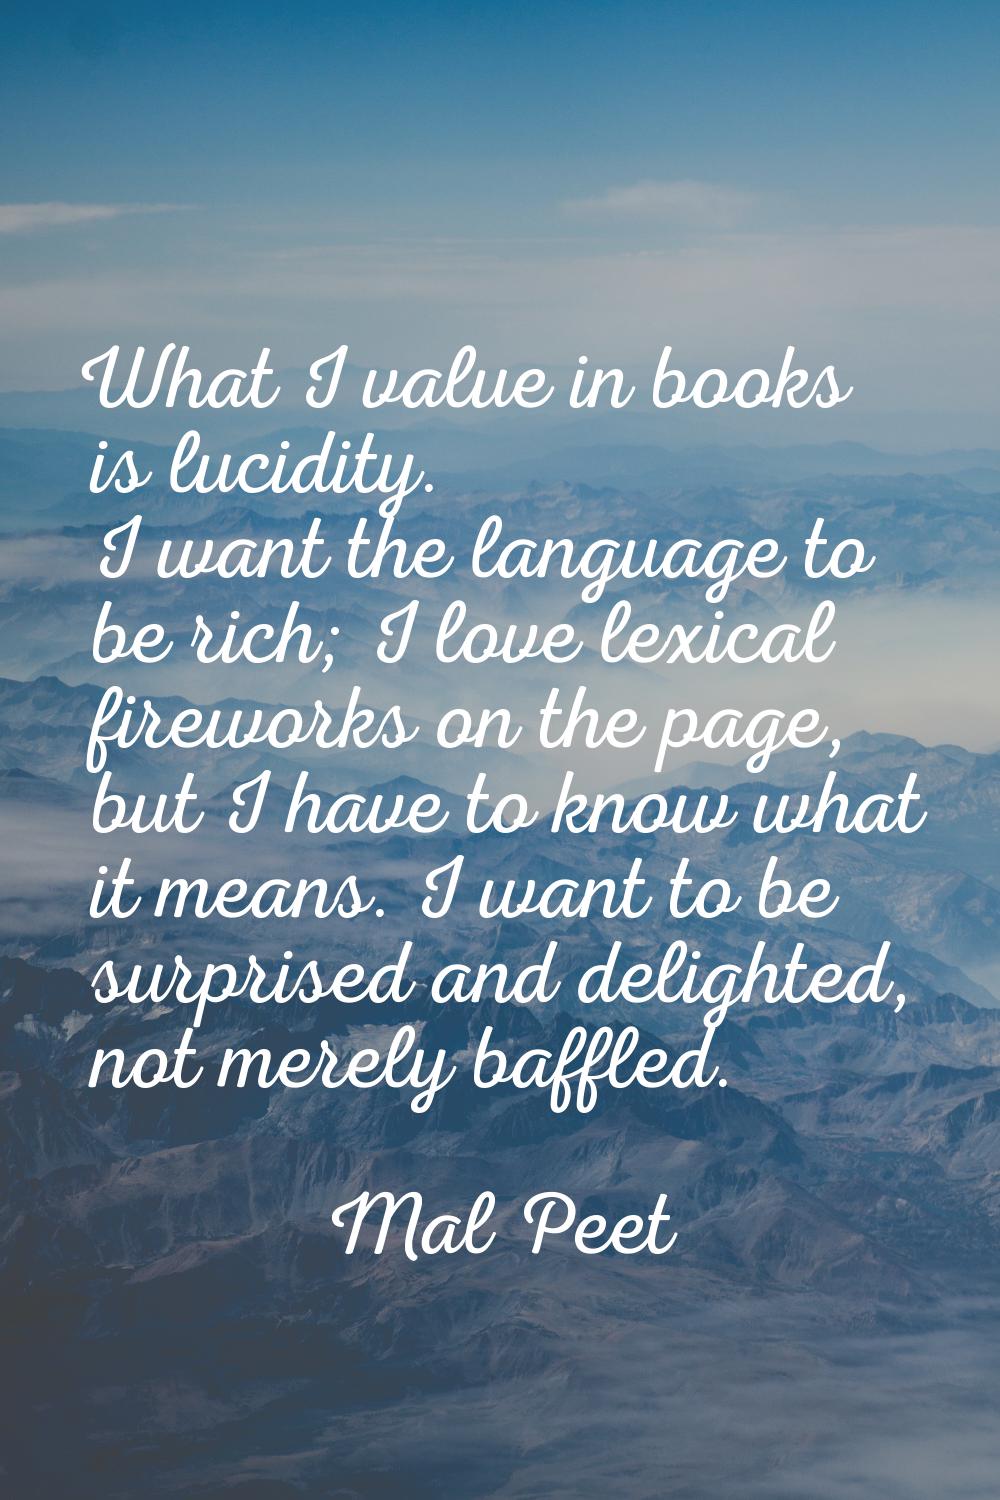 What I value in books is lucidity. I want the language to be rich; I love lexical fireworks on the 